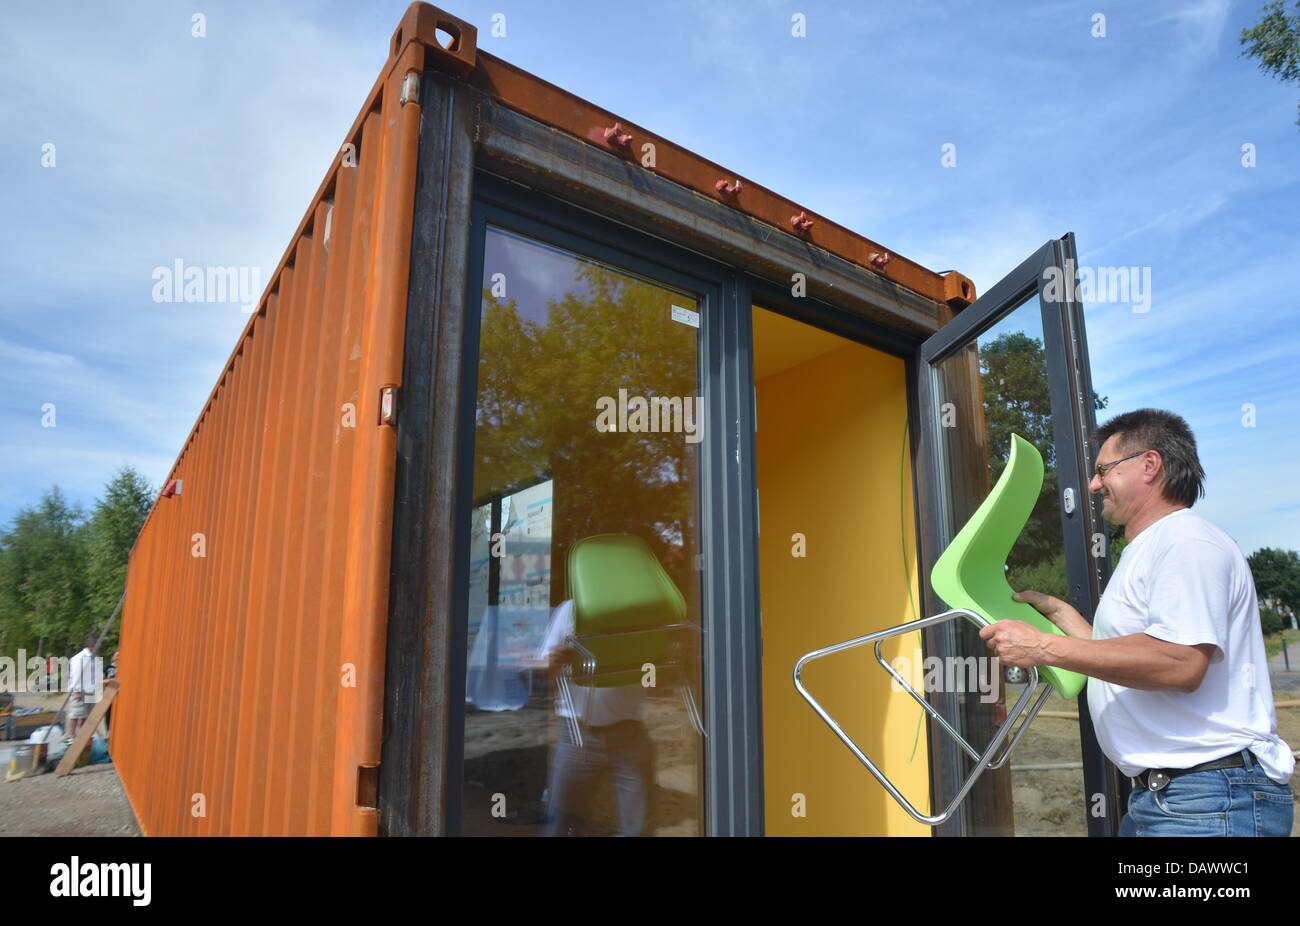 An employee of a furnishing company carries furniture into a container in students village Plaenterwald in Berlin, Germany, 19 July 2013. Students can move into the rebuilt freight containers from next semester starting in October. Photo: BRITTA PEDERSEN Stock Photo